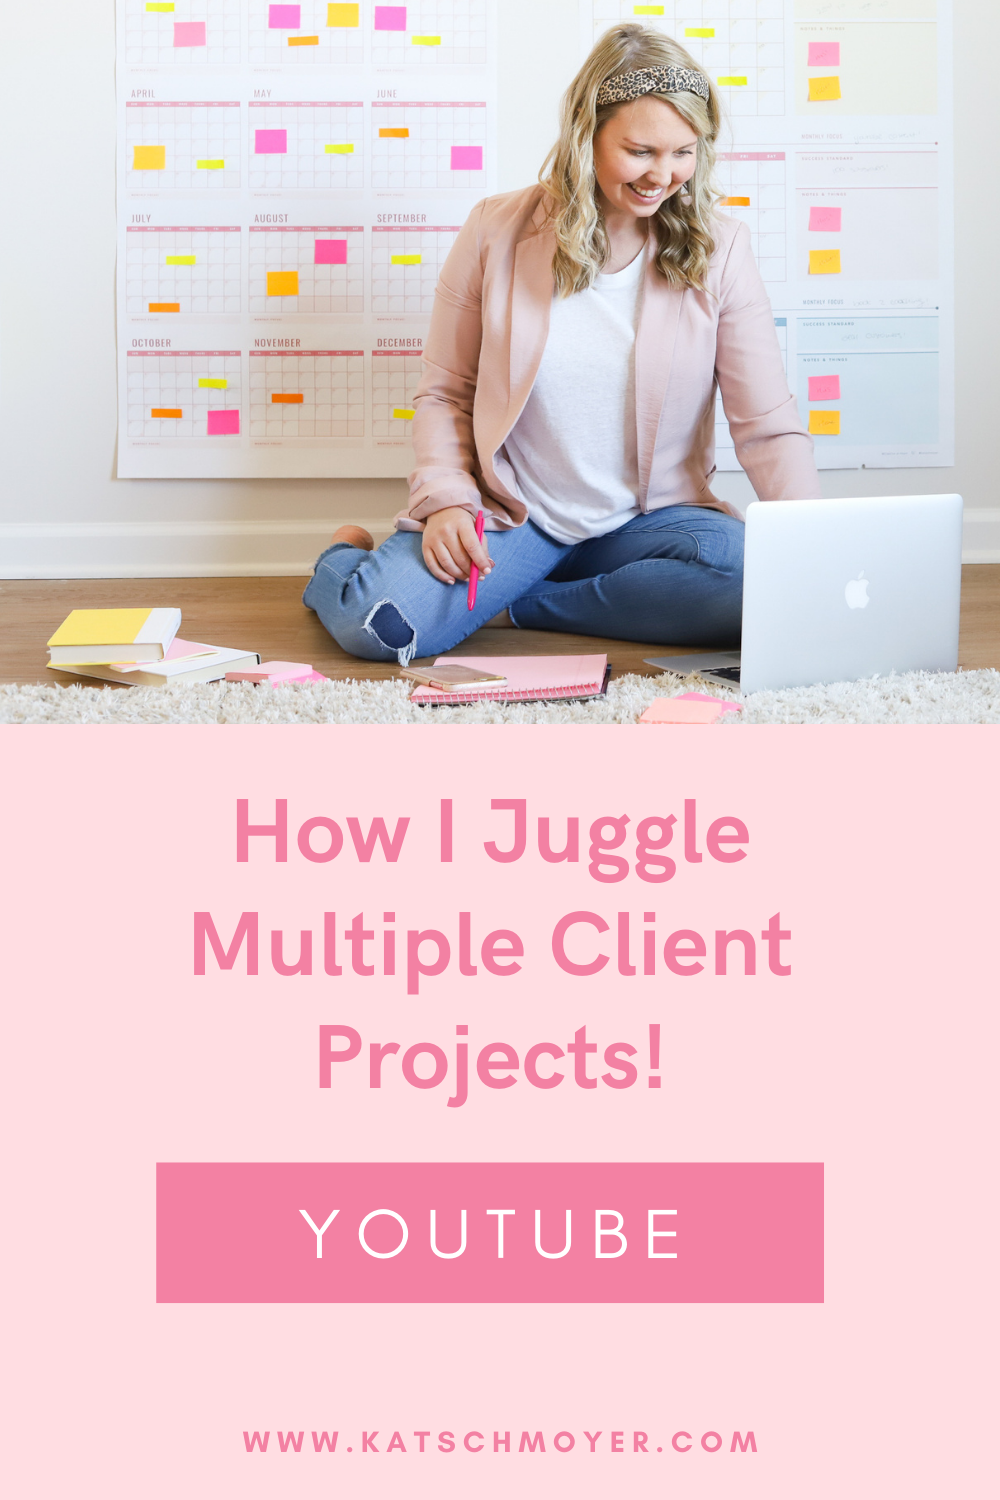 How I Juggle Multiple Client Projects